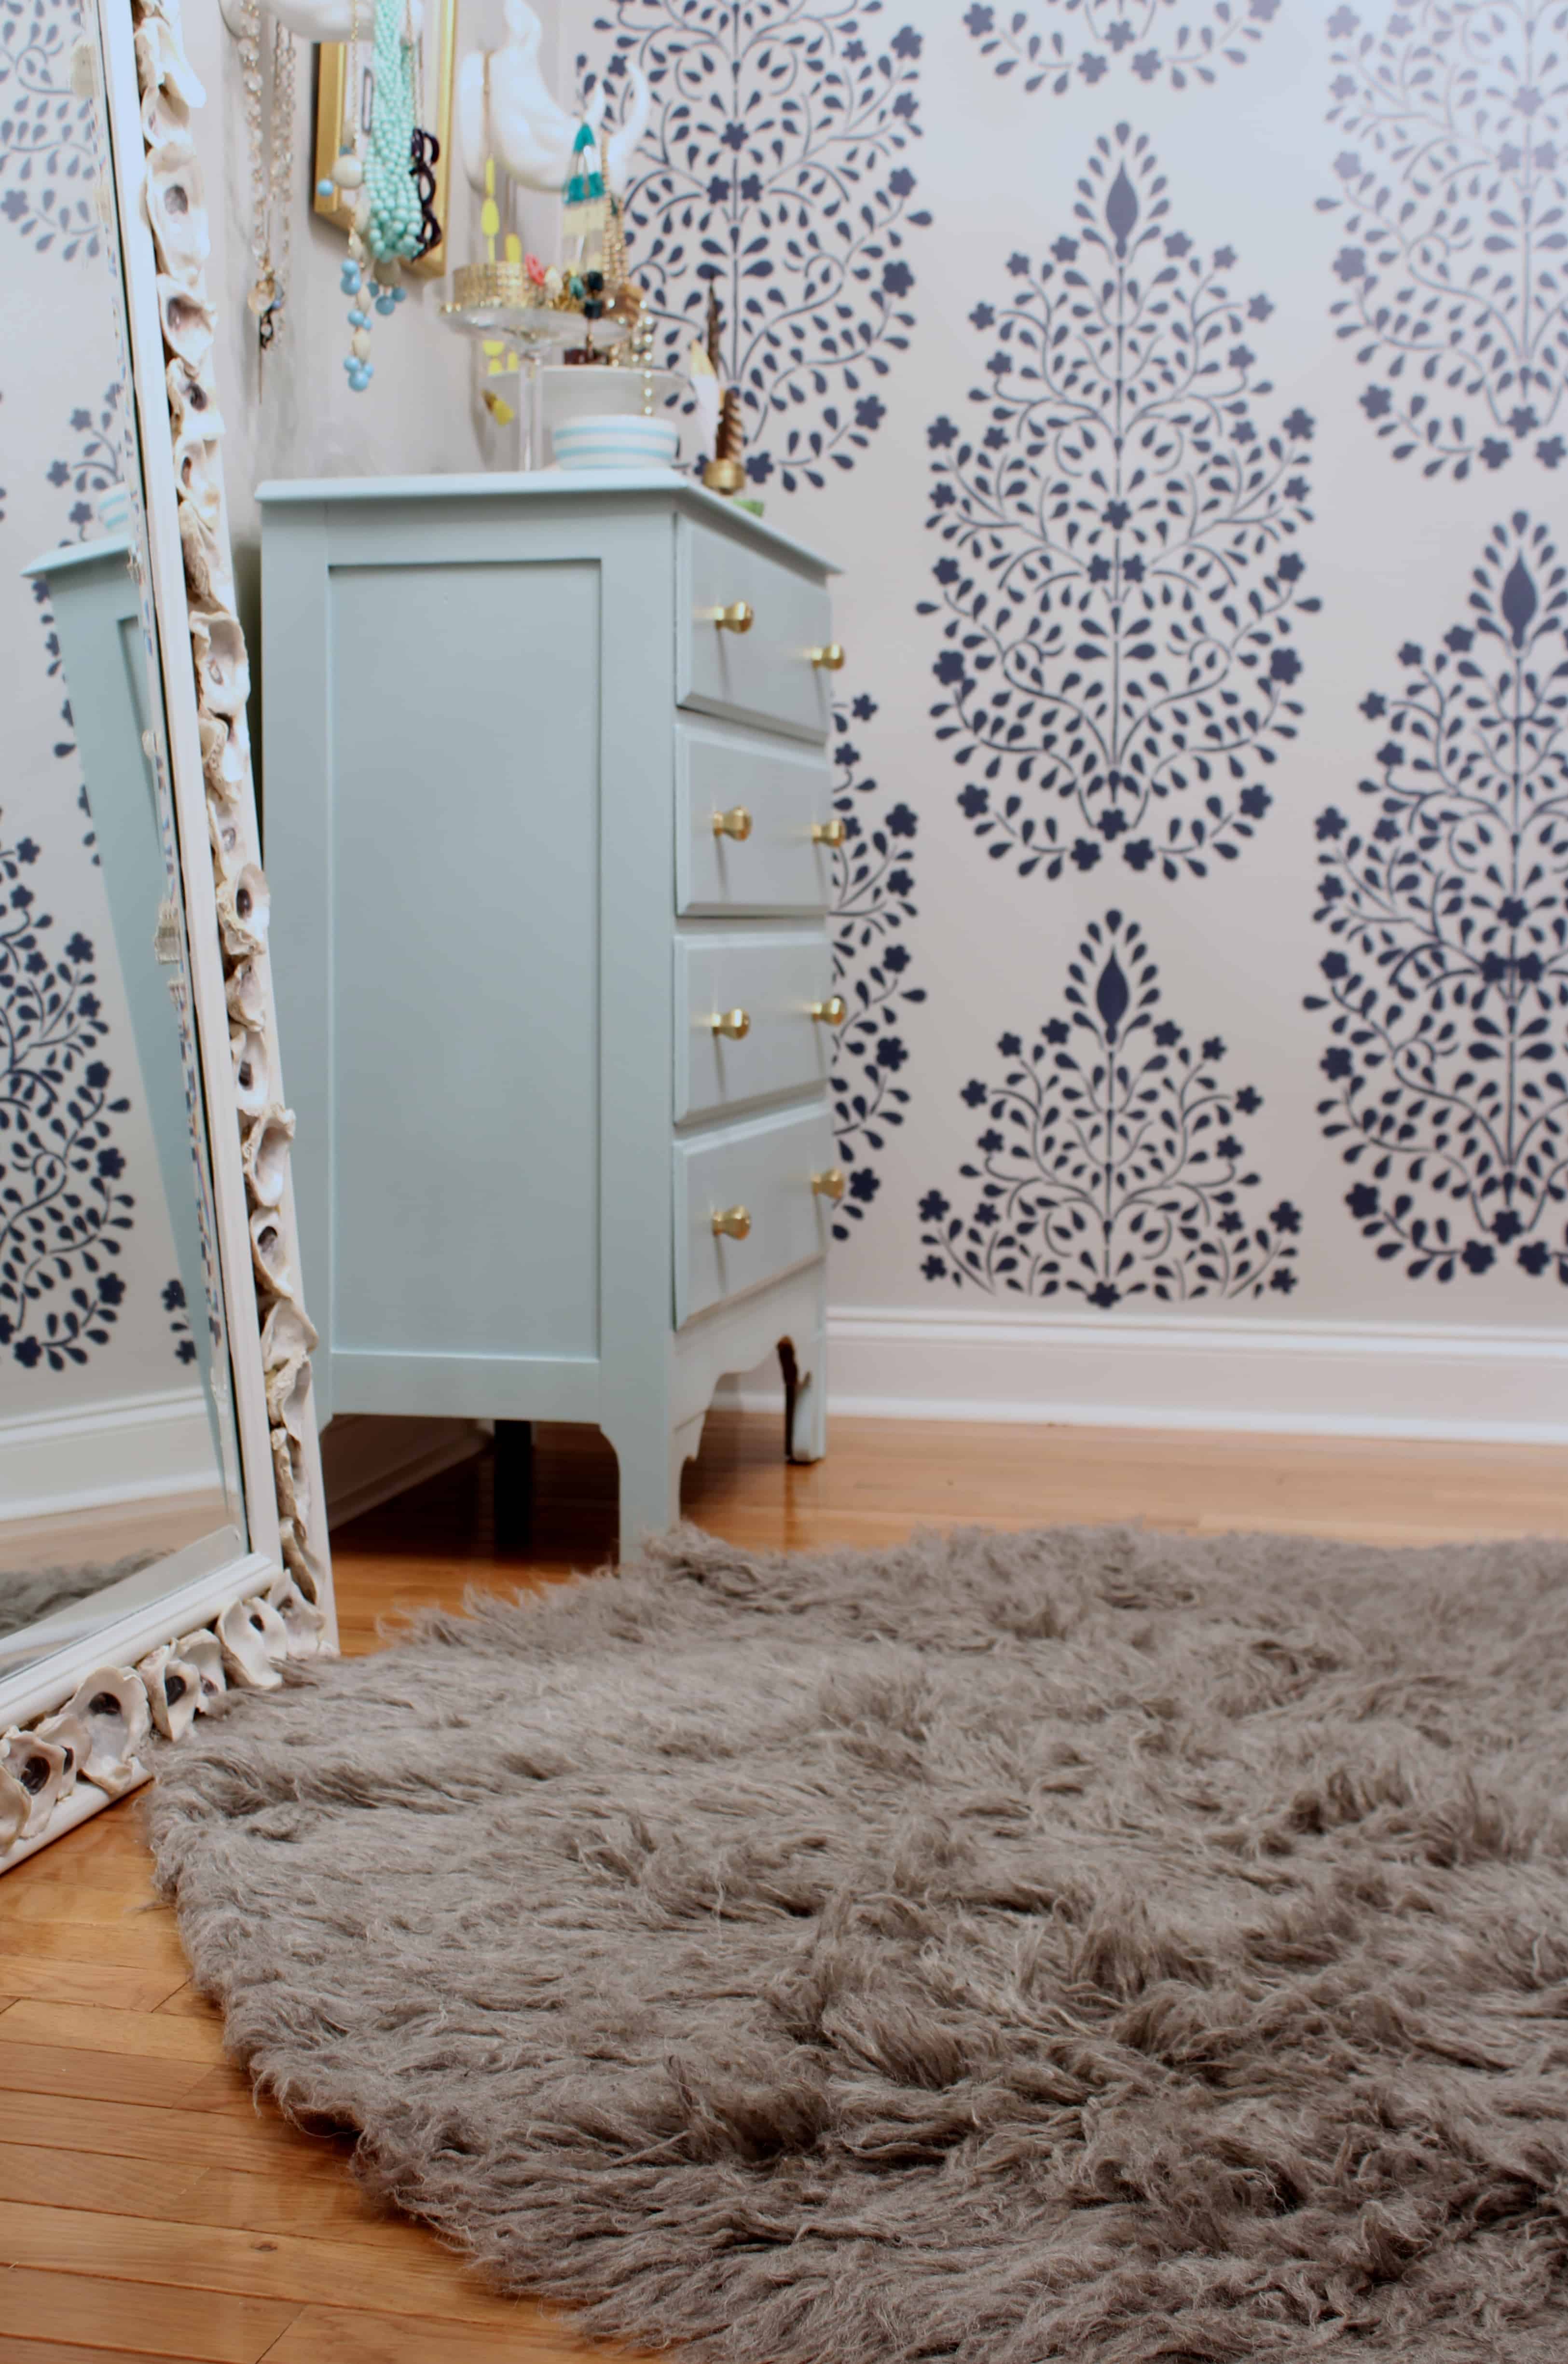 DIY Stenciled Accent Wall Tutorial